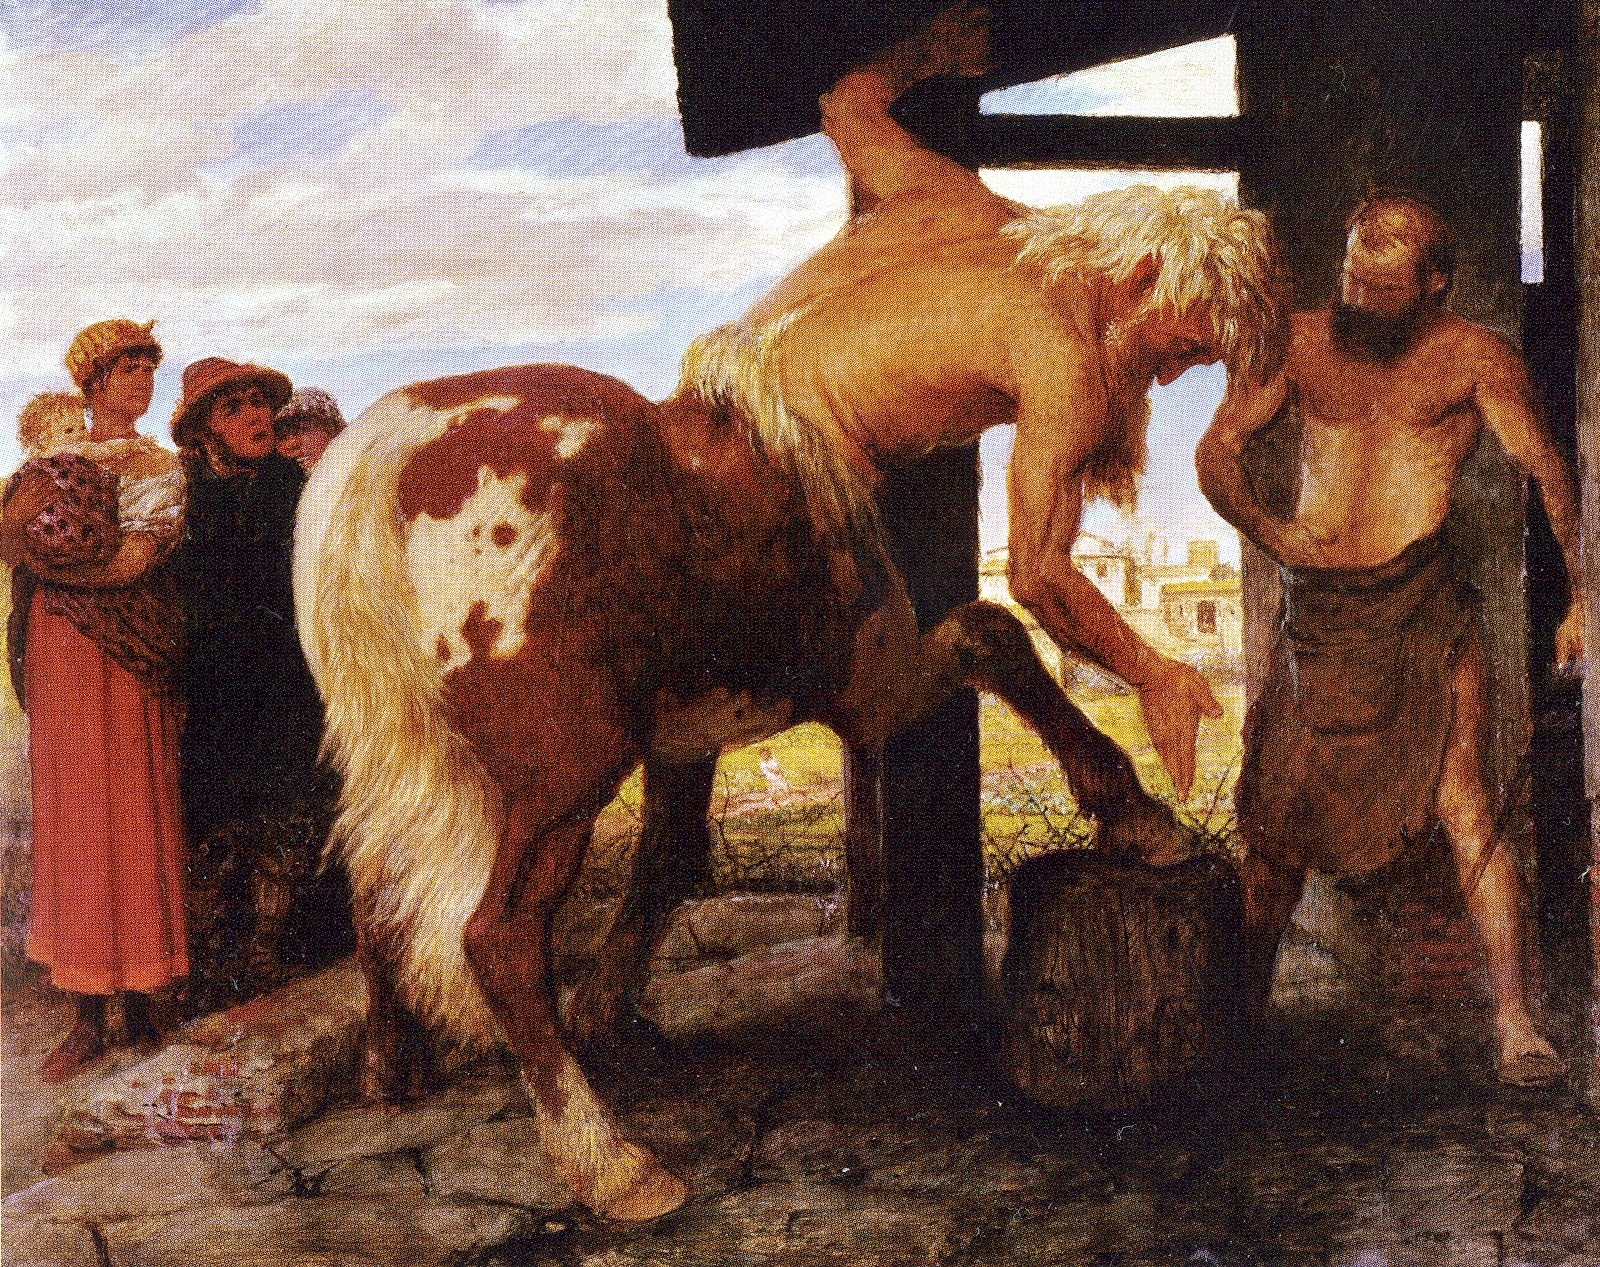 A centaur rests his leg on a wooden stool and is surrounded by a group of civilians.